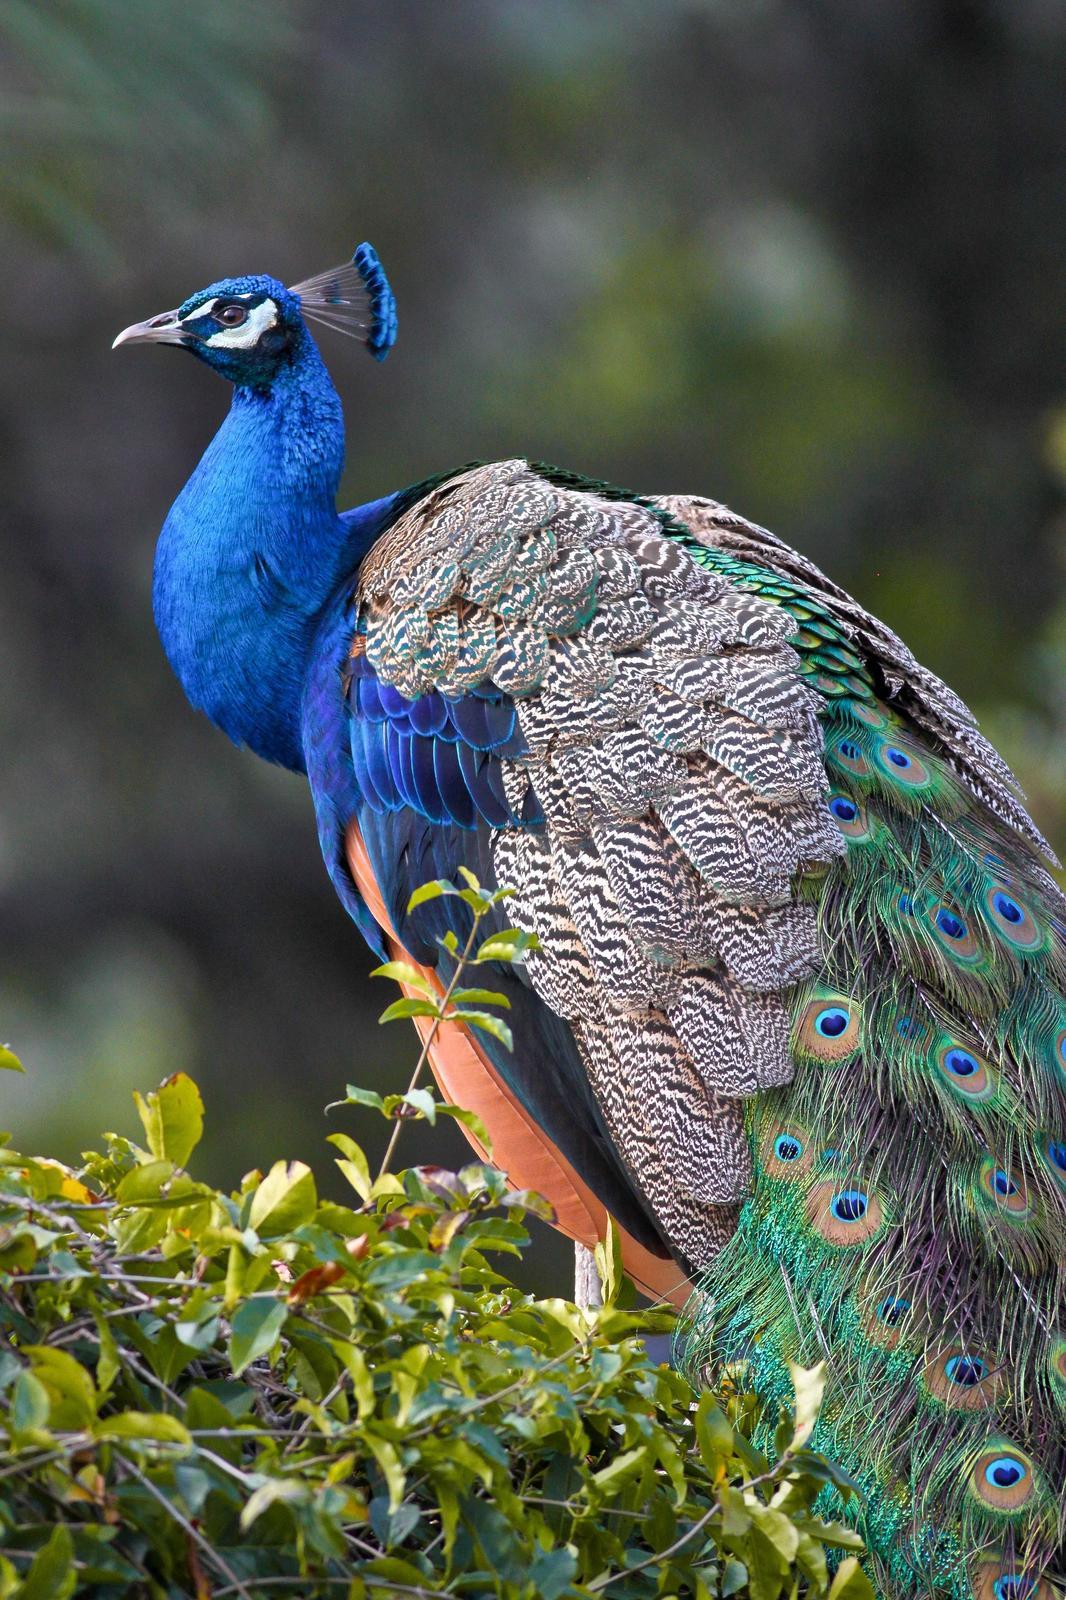 Indian Peafowl Photo by Tom Ford-Hutchinson